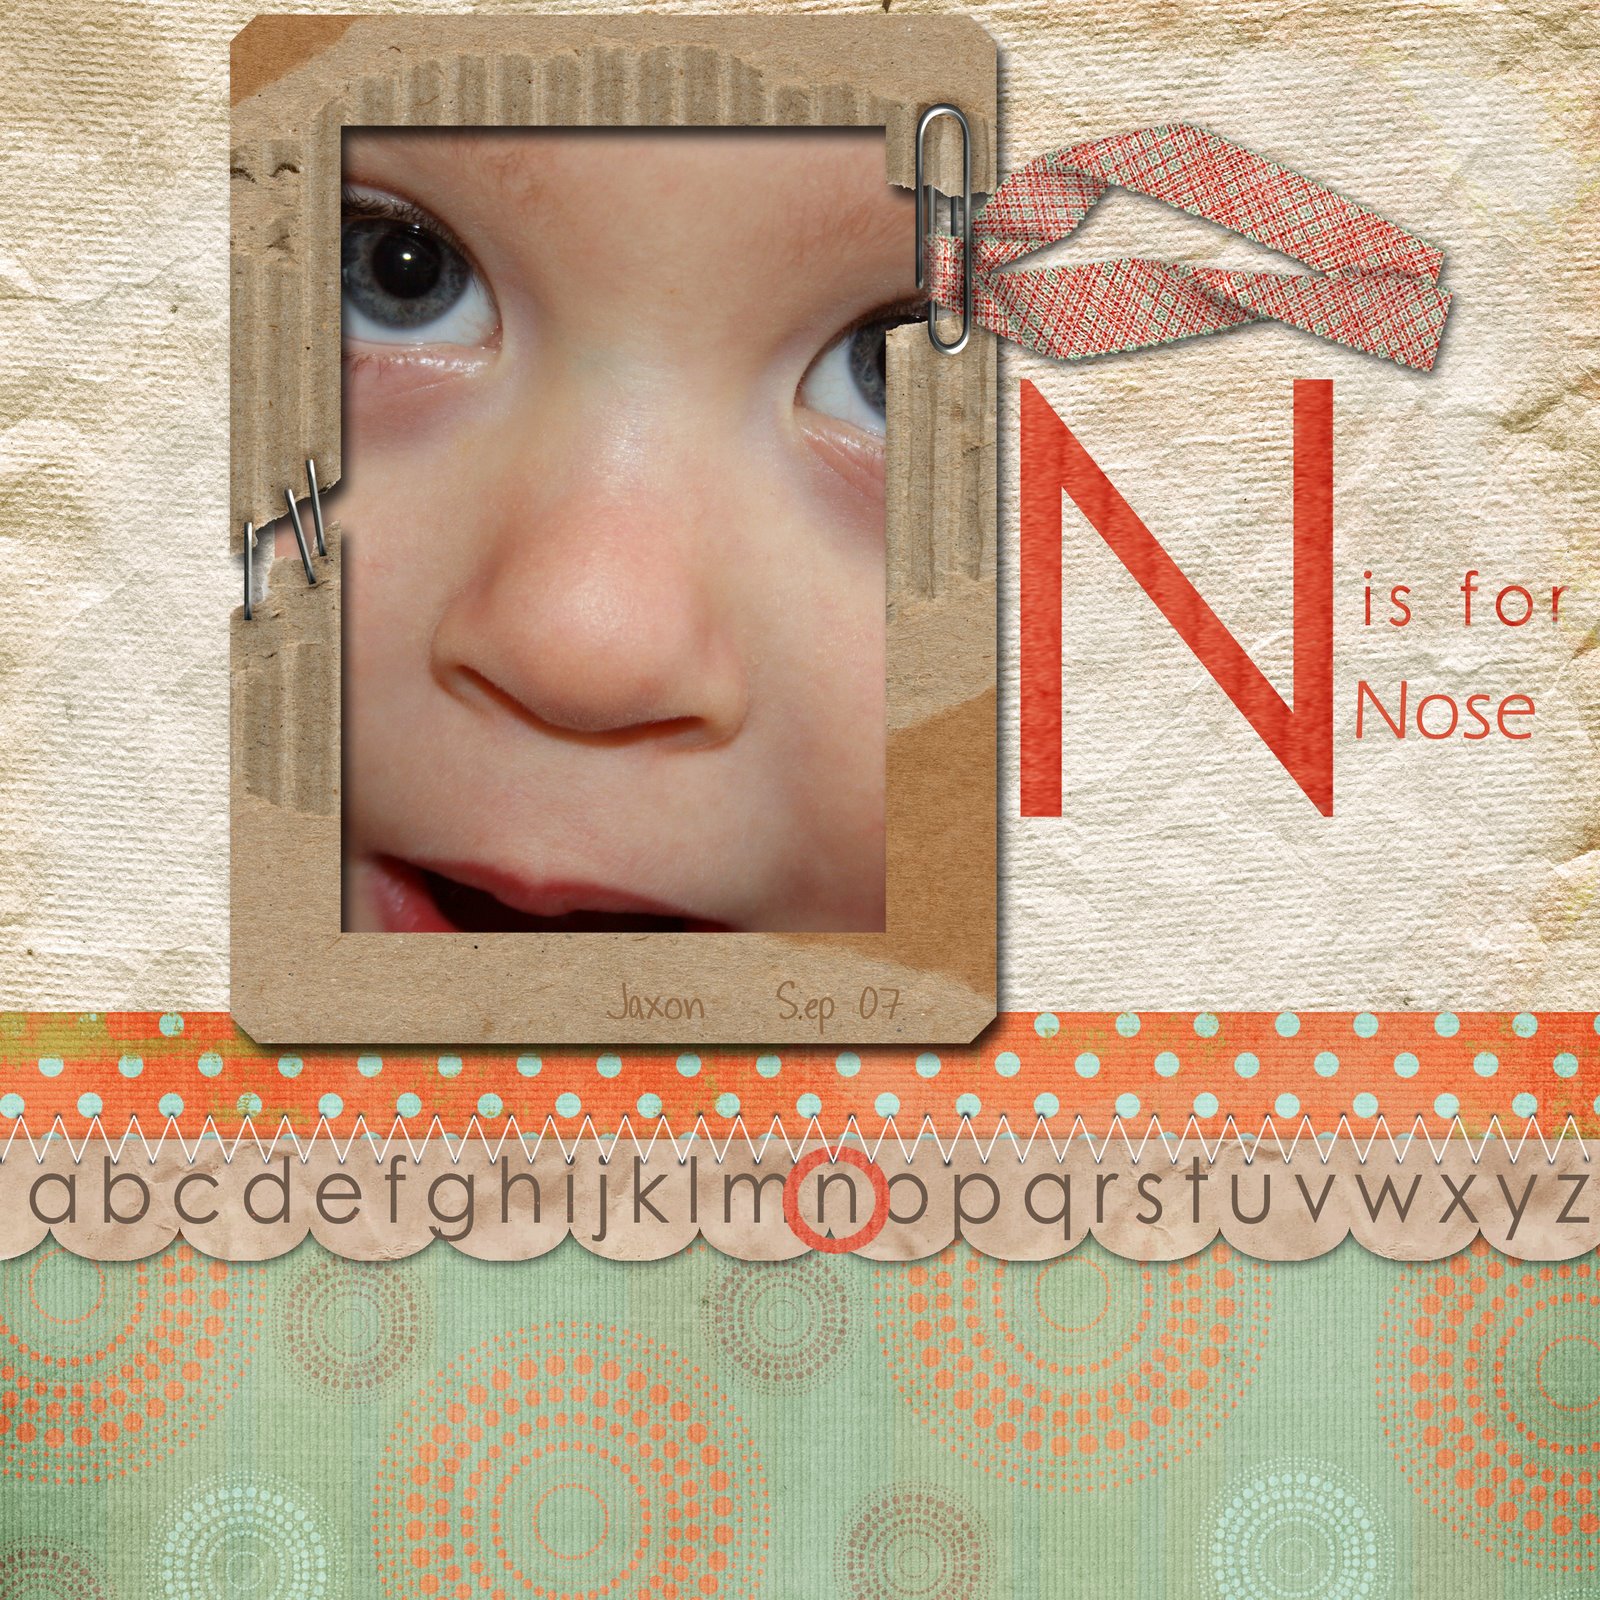 [N+is+for+Nose.jpg]